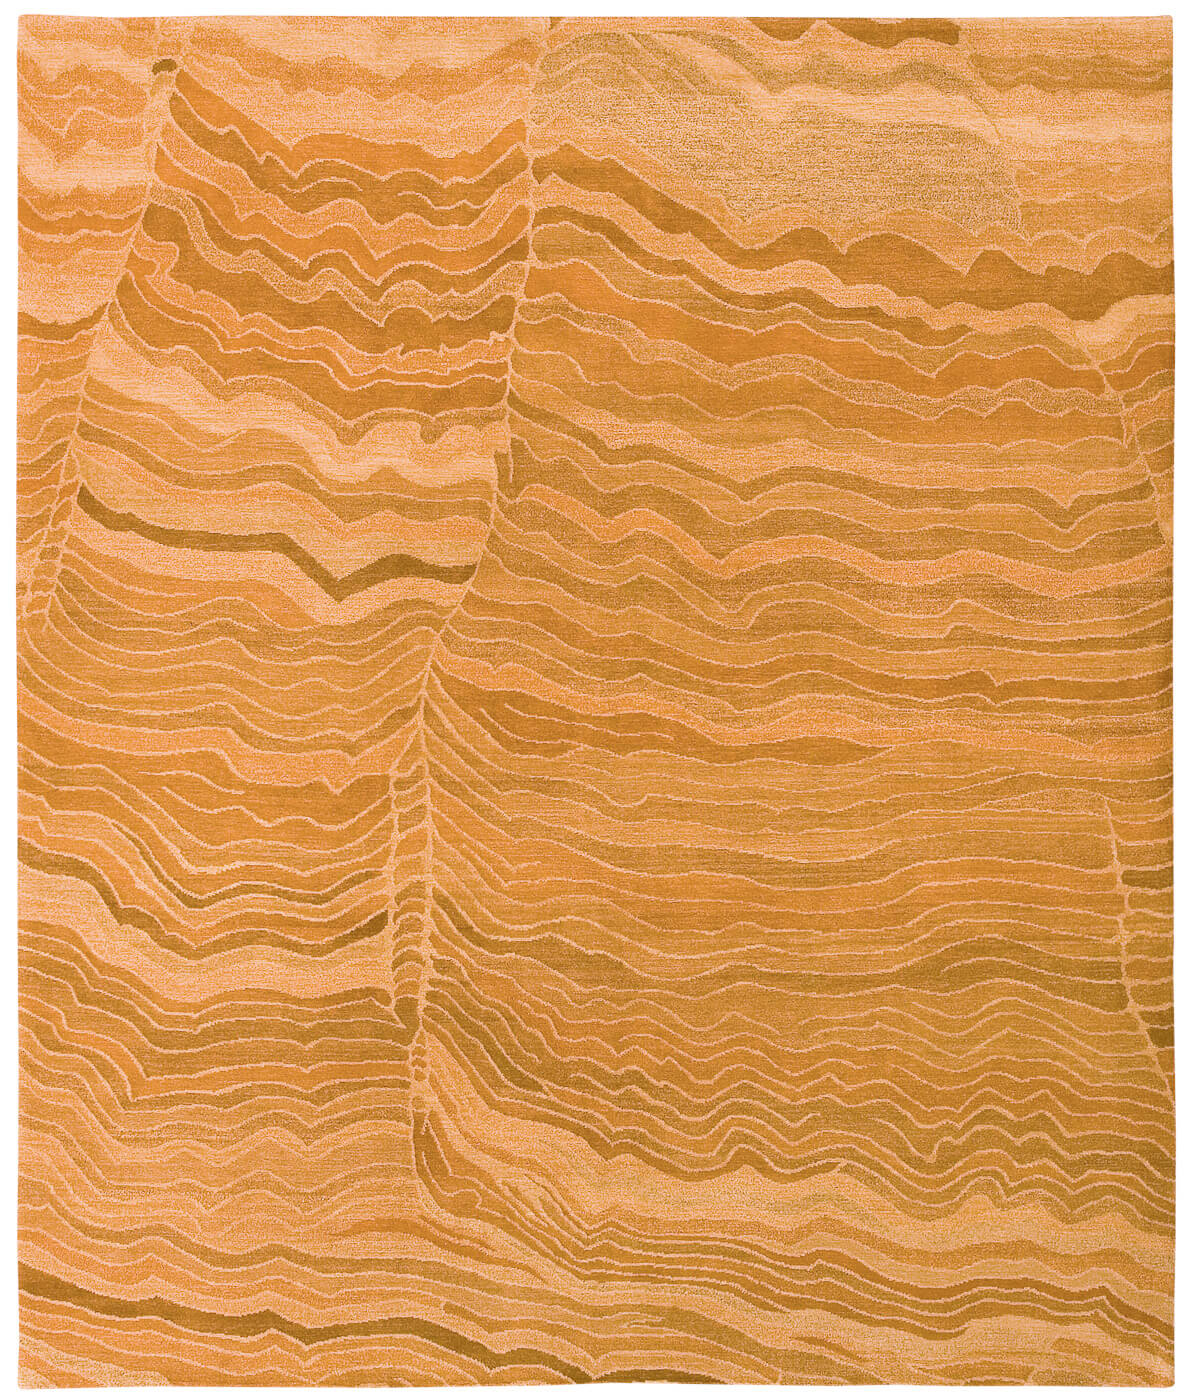 Hand-woven Wool Gold Luxury Rug ☞ Size: 300 x 400 cm